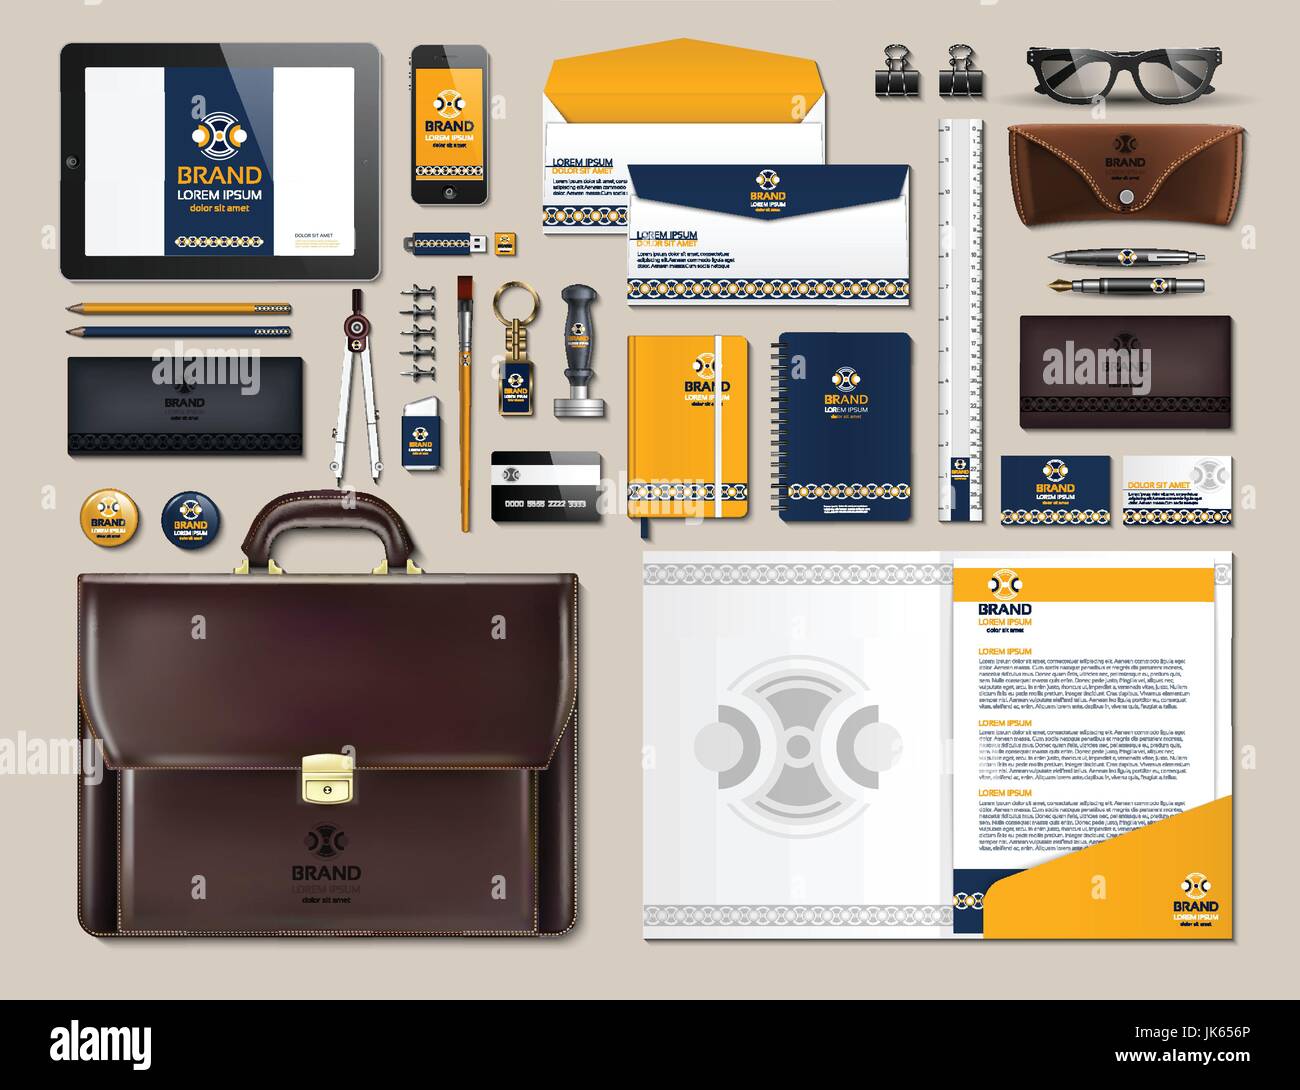 Business corporate identity items set. Vector working articles portofolio, glasses, phone, tablet, maps with brand logos. Work Stuff Stationery 3d rea Stock Vector